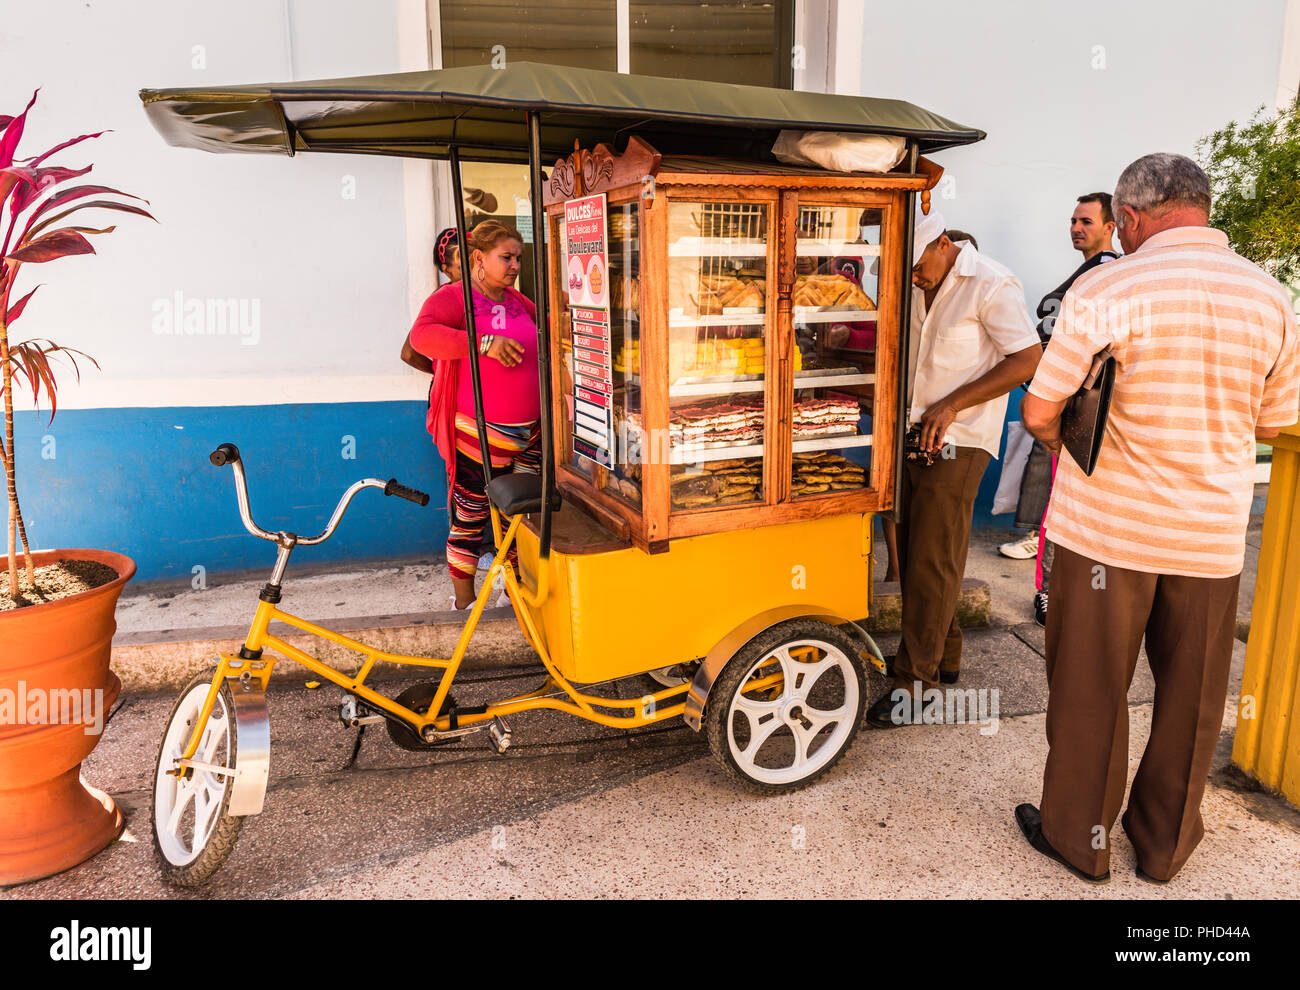 Sancti  Spiritus , Cuba / March 15, 2017: Pastry - Dulces - seller sells wares from a mobile stand powered by a three wheel bicycle. Stock Photo